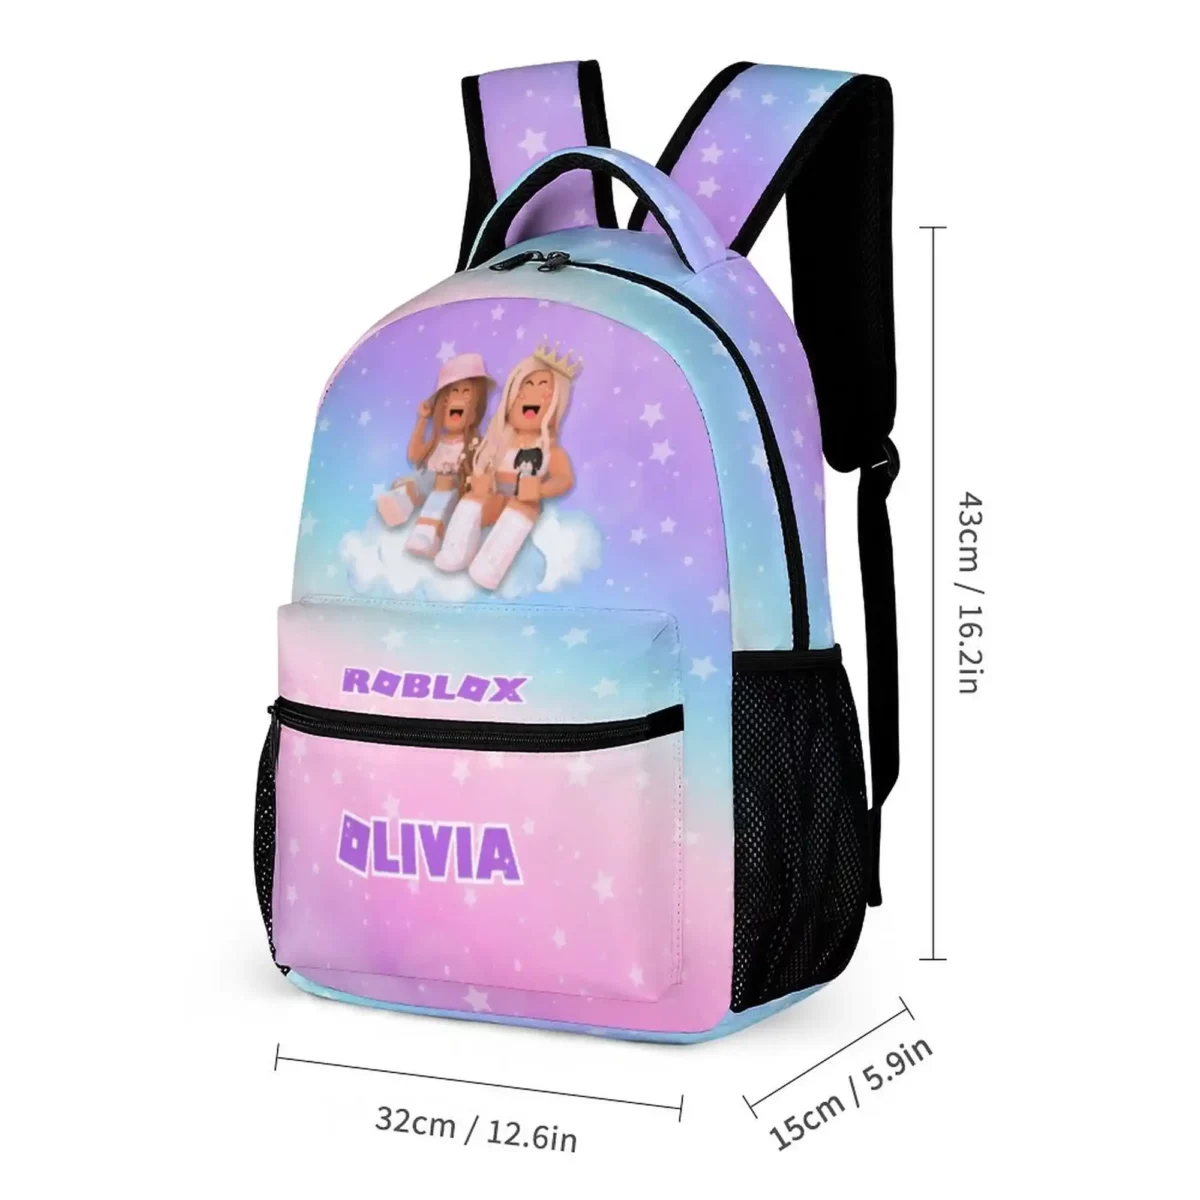 Personalized Pink and Purple, Roblox Avatars Girls Backpack with Customizable Name Cool Kiddo 18